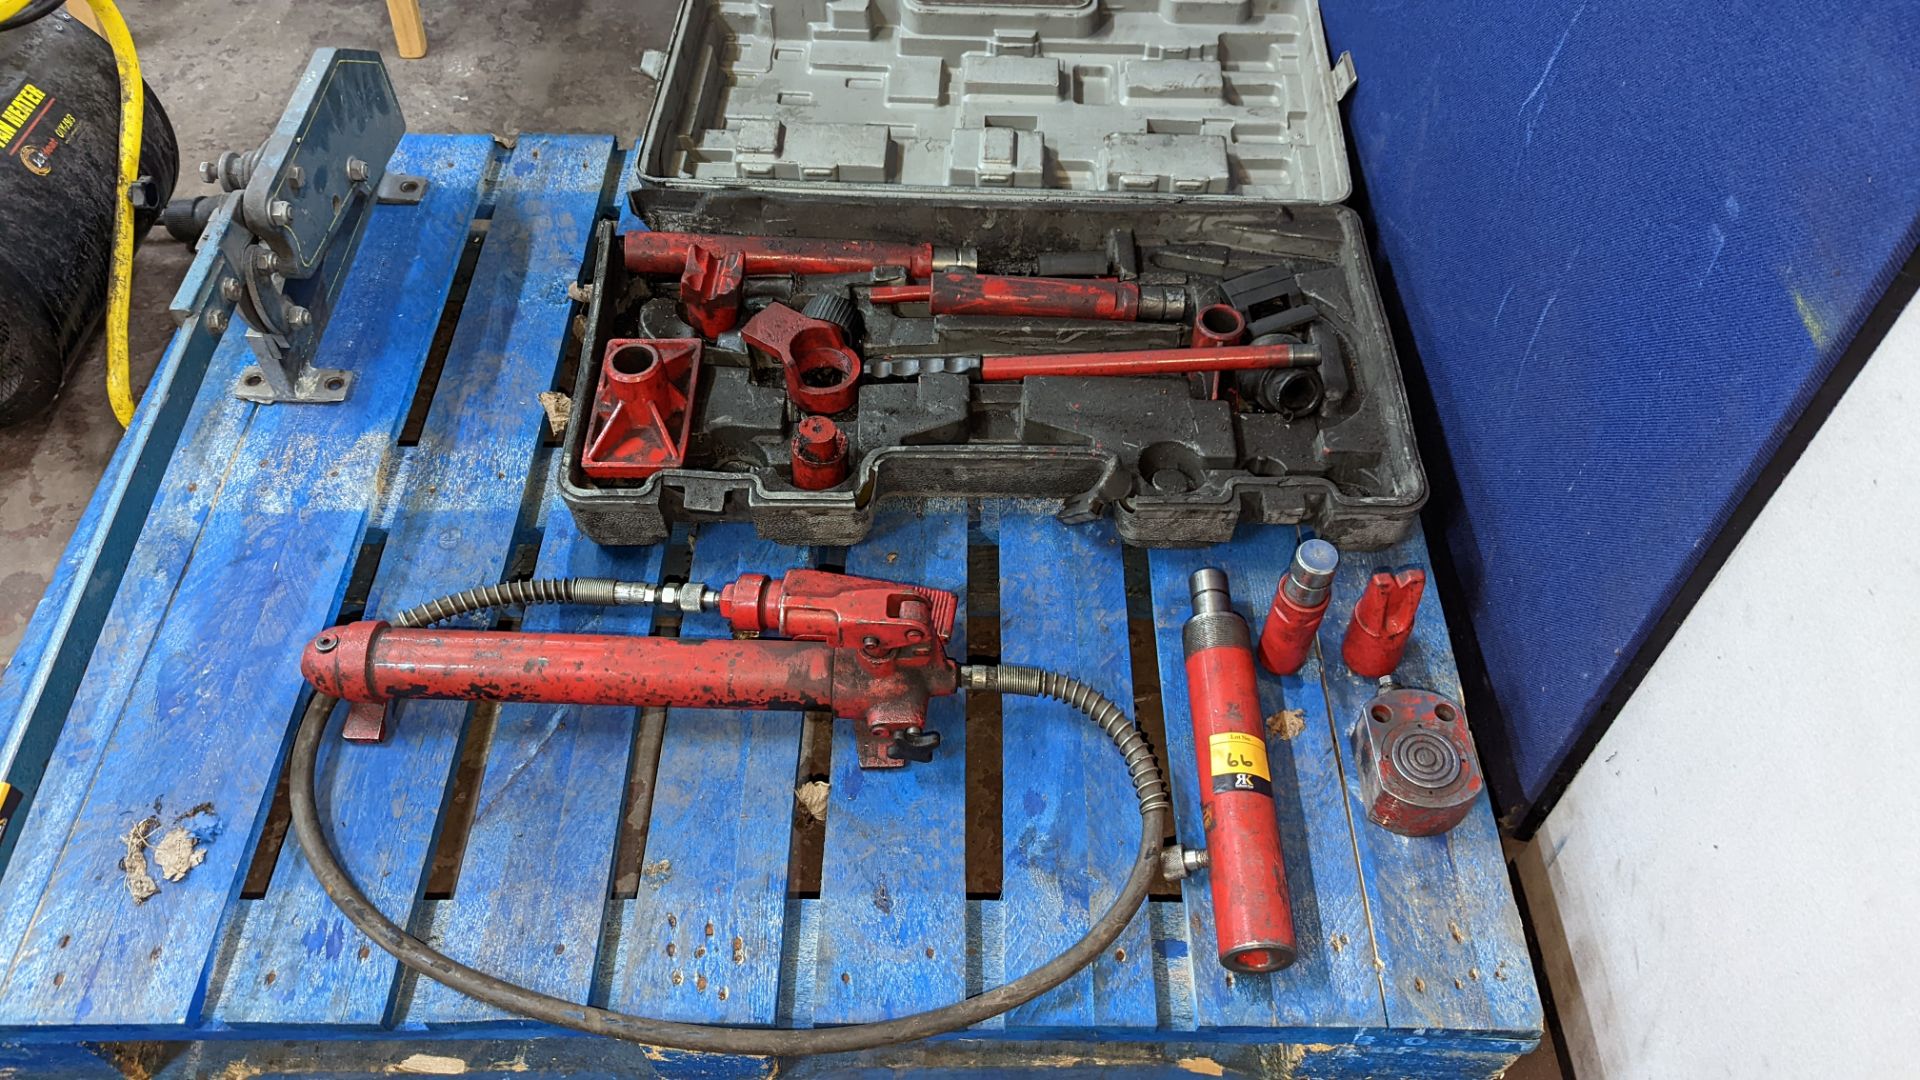 10 ton capacity hydraulic body frame repair air kit, as pictured